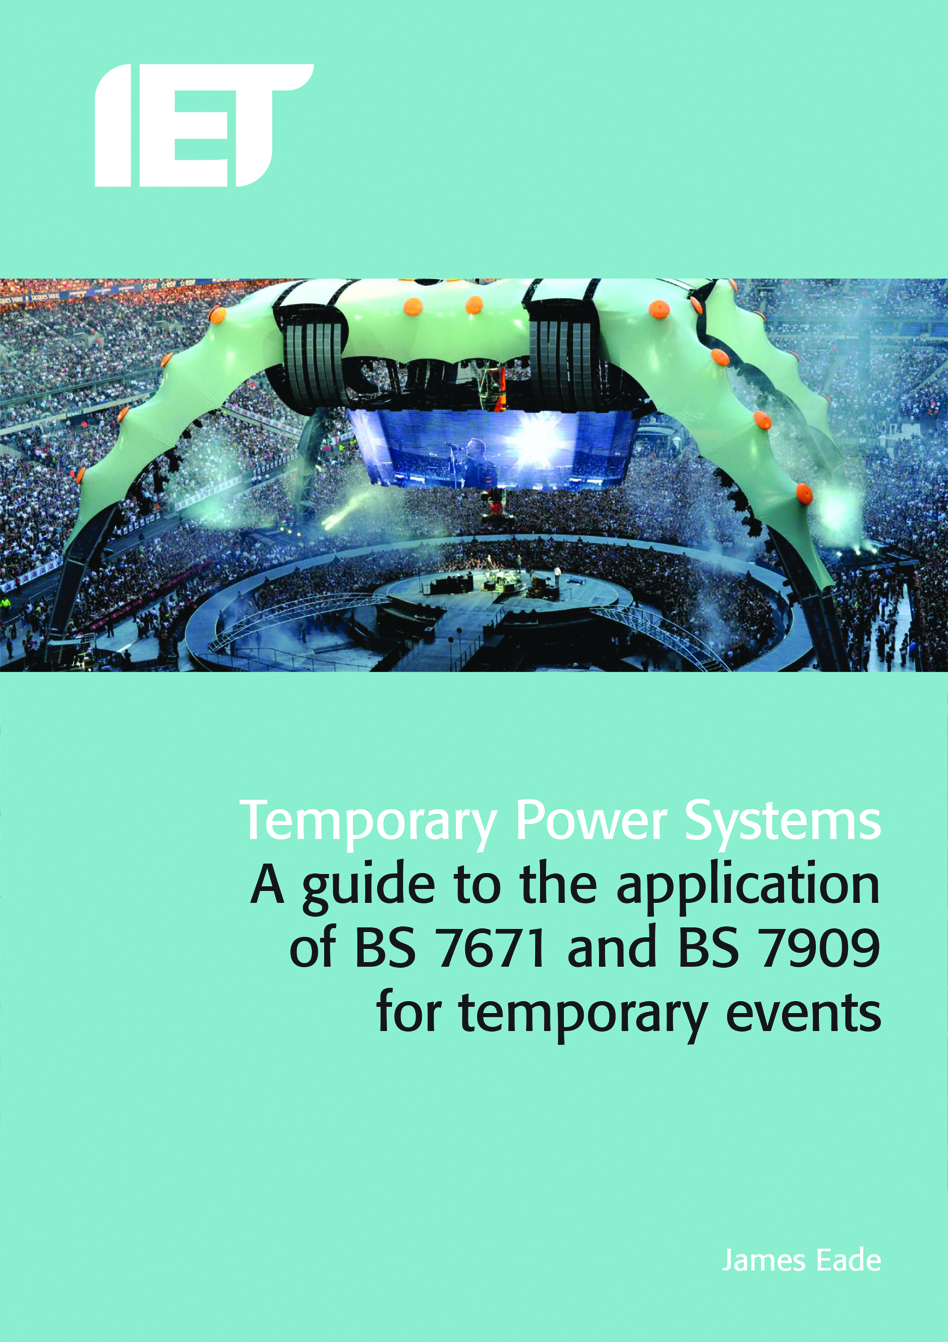 Temporary Power Systems, A guide to the application of BS 7671 and BS 7909 for temporary events